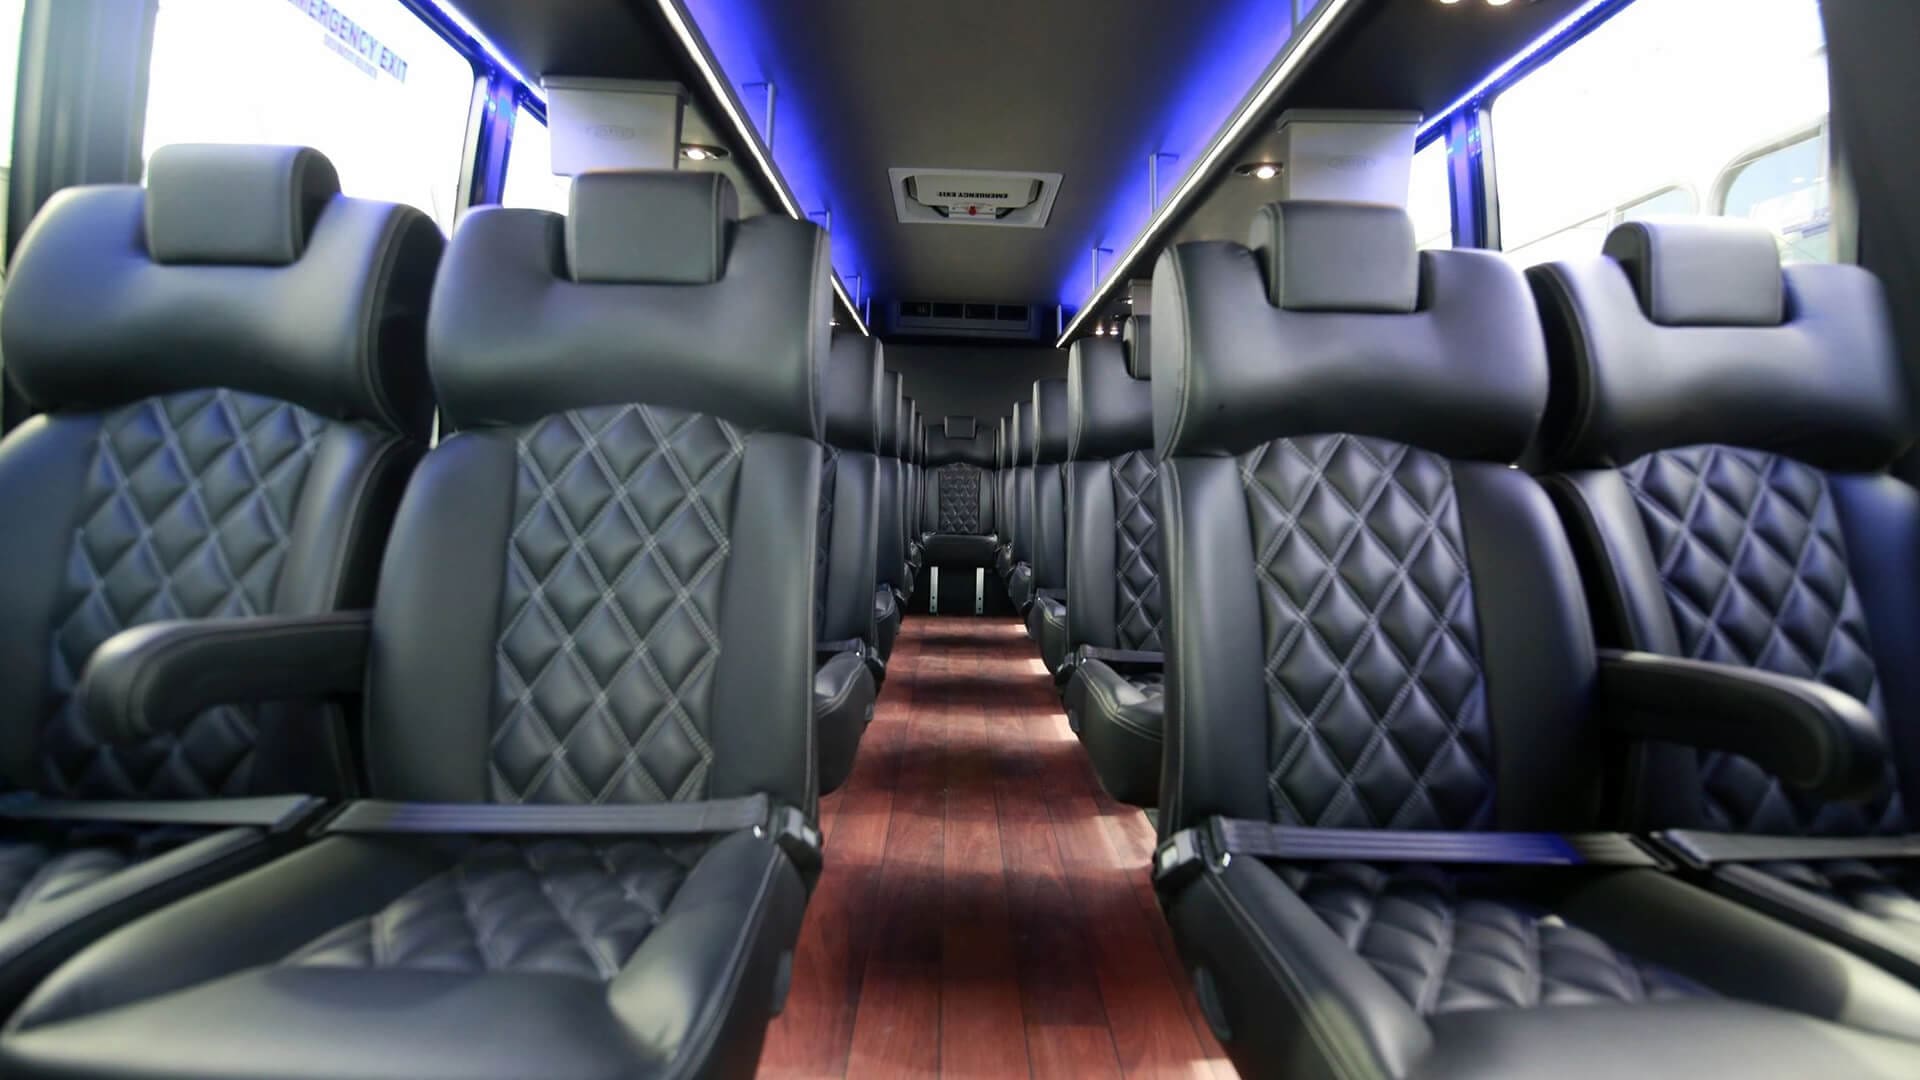 A bus with black seats and blue lights